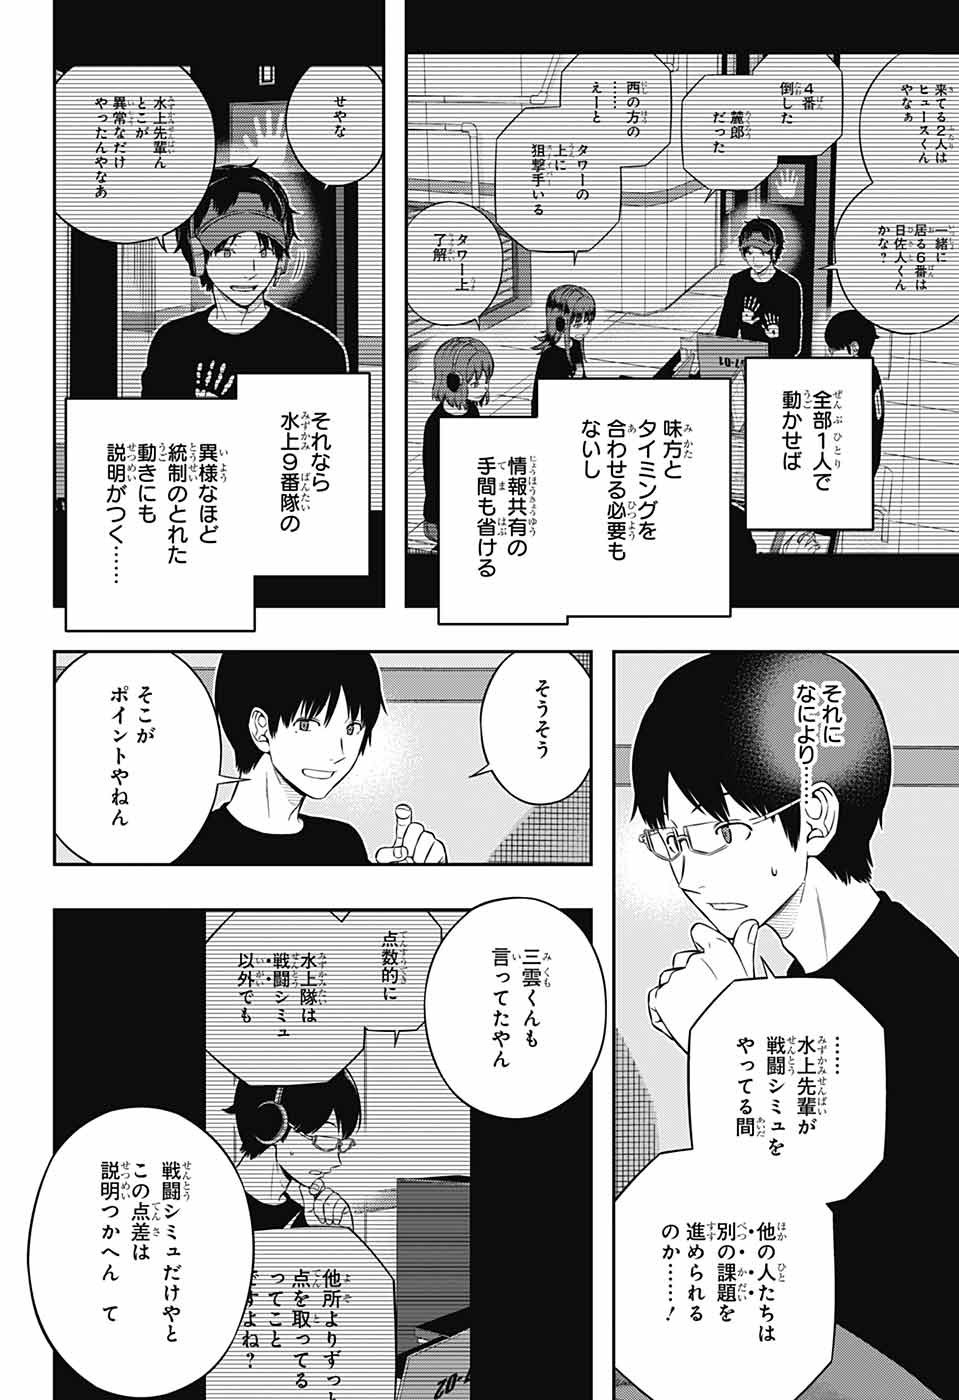 World Trigger - Chapter 223 - Page 2